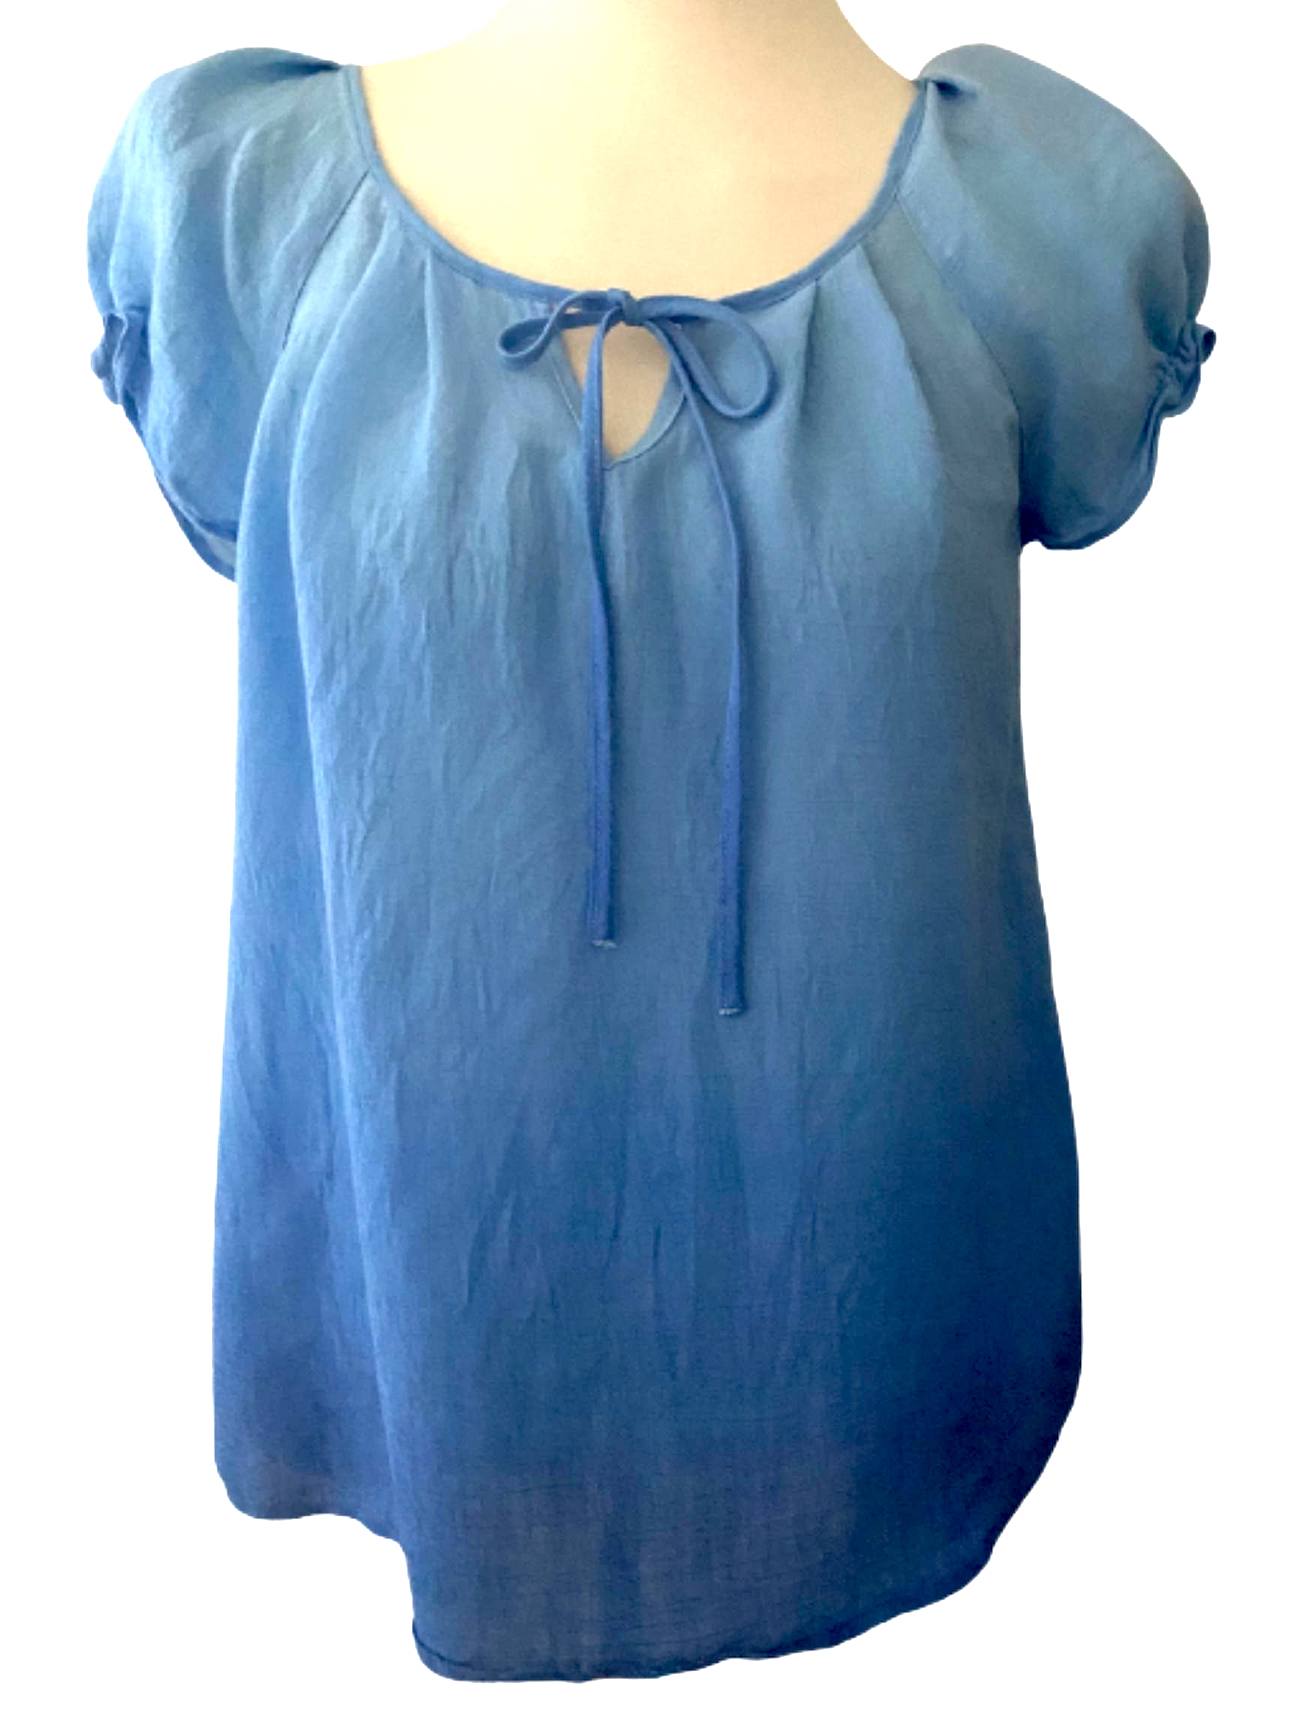 Cool Summer CHRISTOPHER BANKS blue ombre top